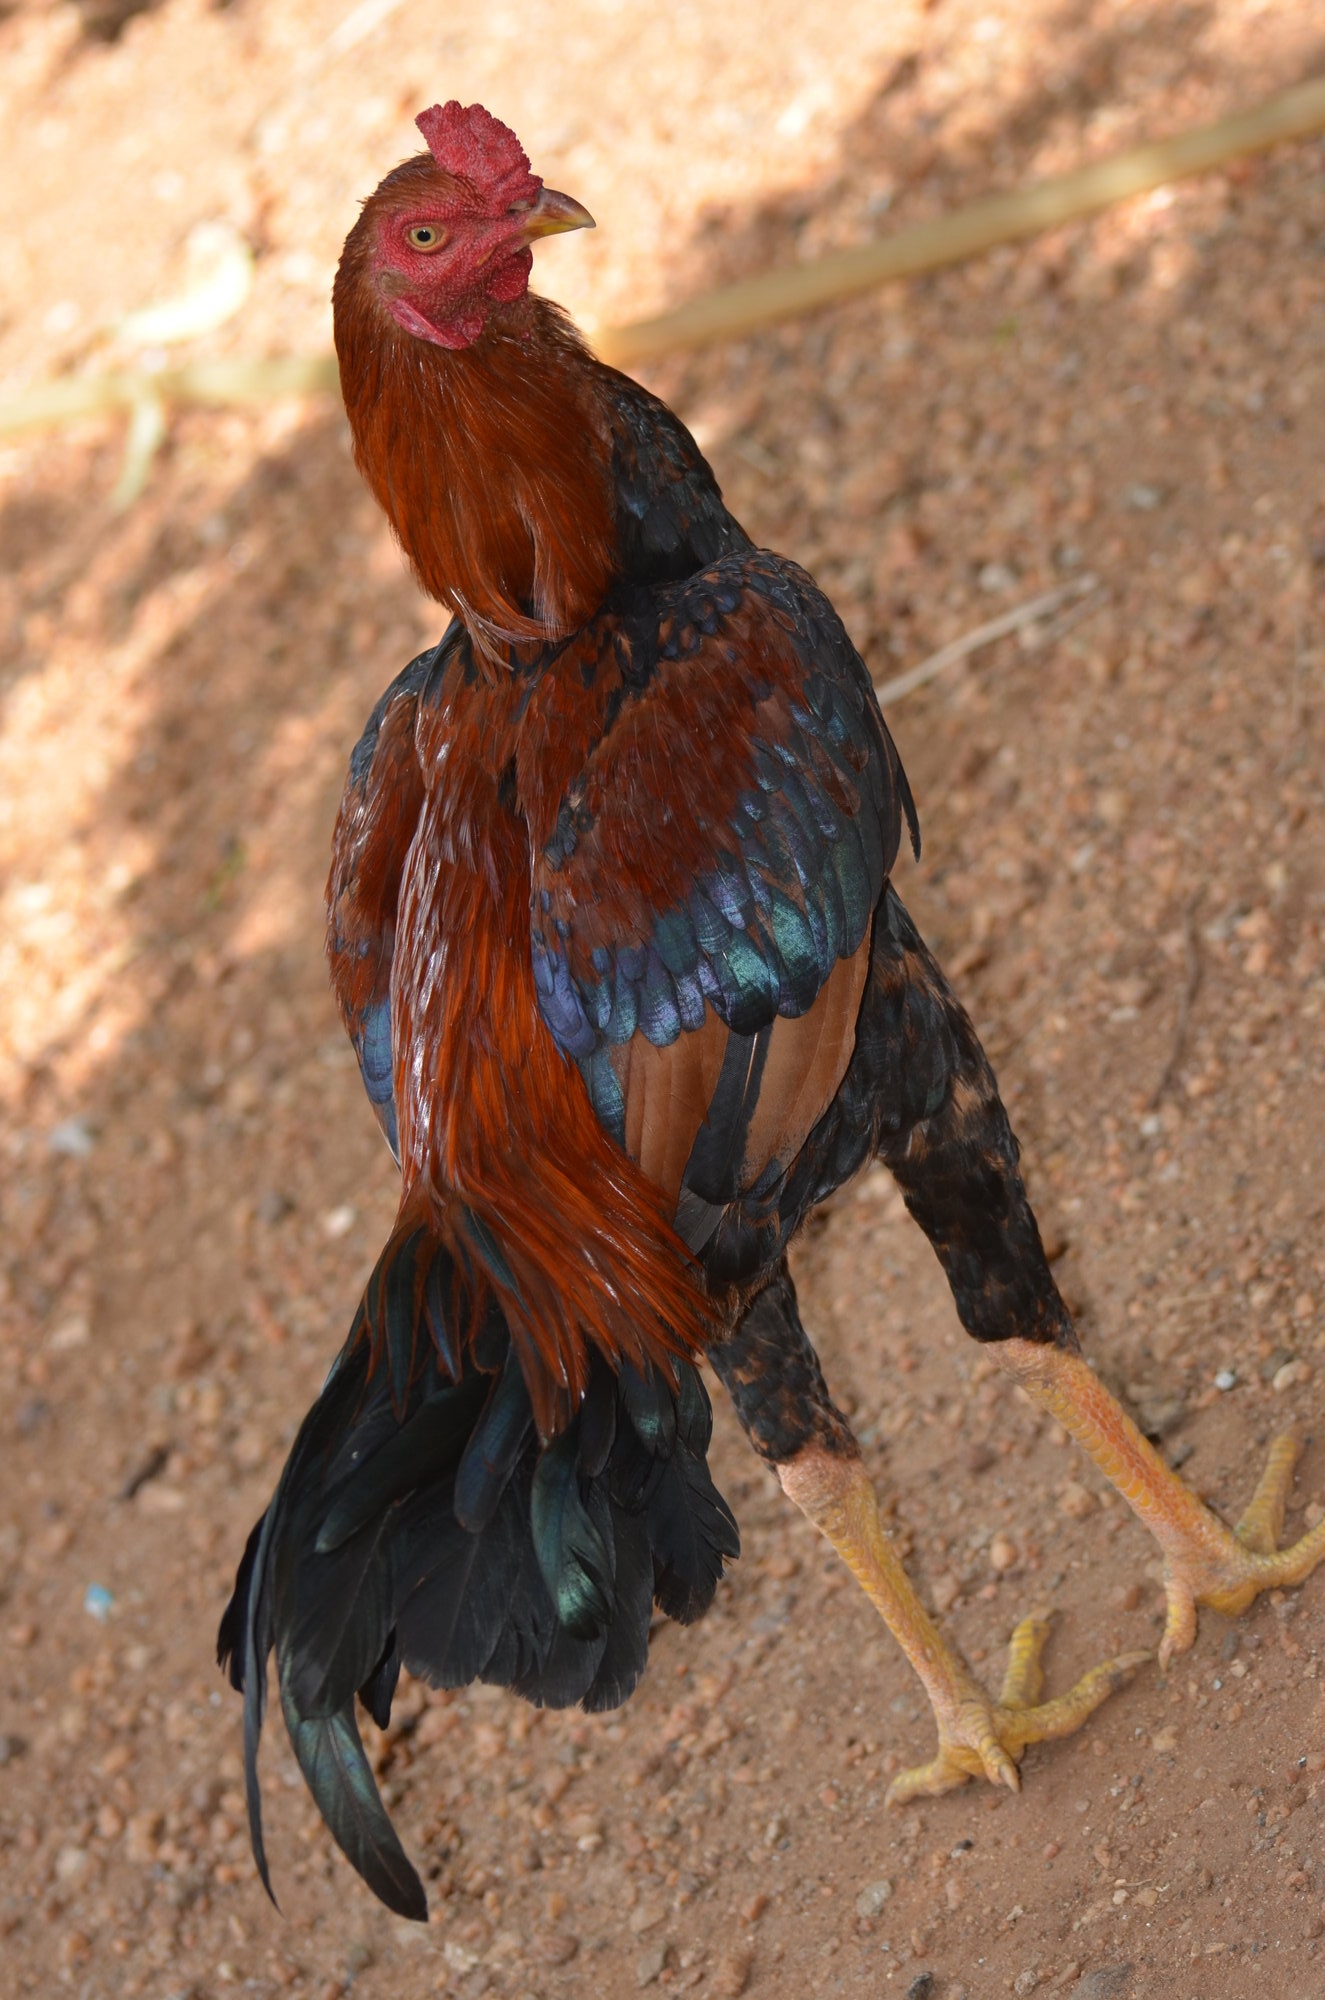 'Copper' - Our 8 month Old Cockerel with unique Tail Coverts